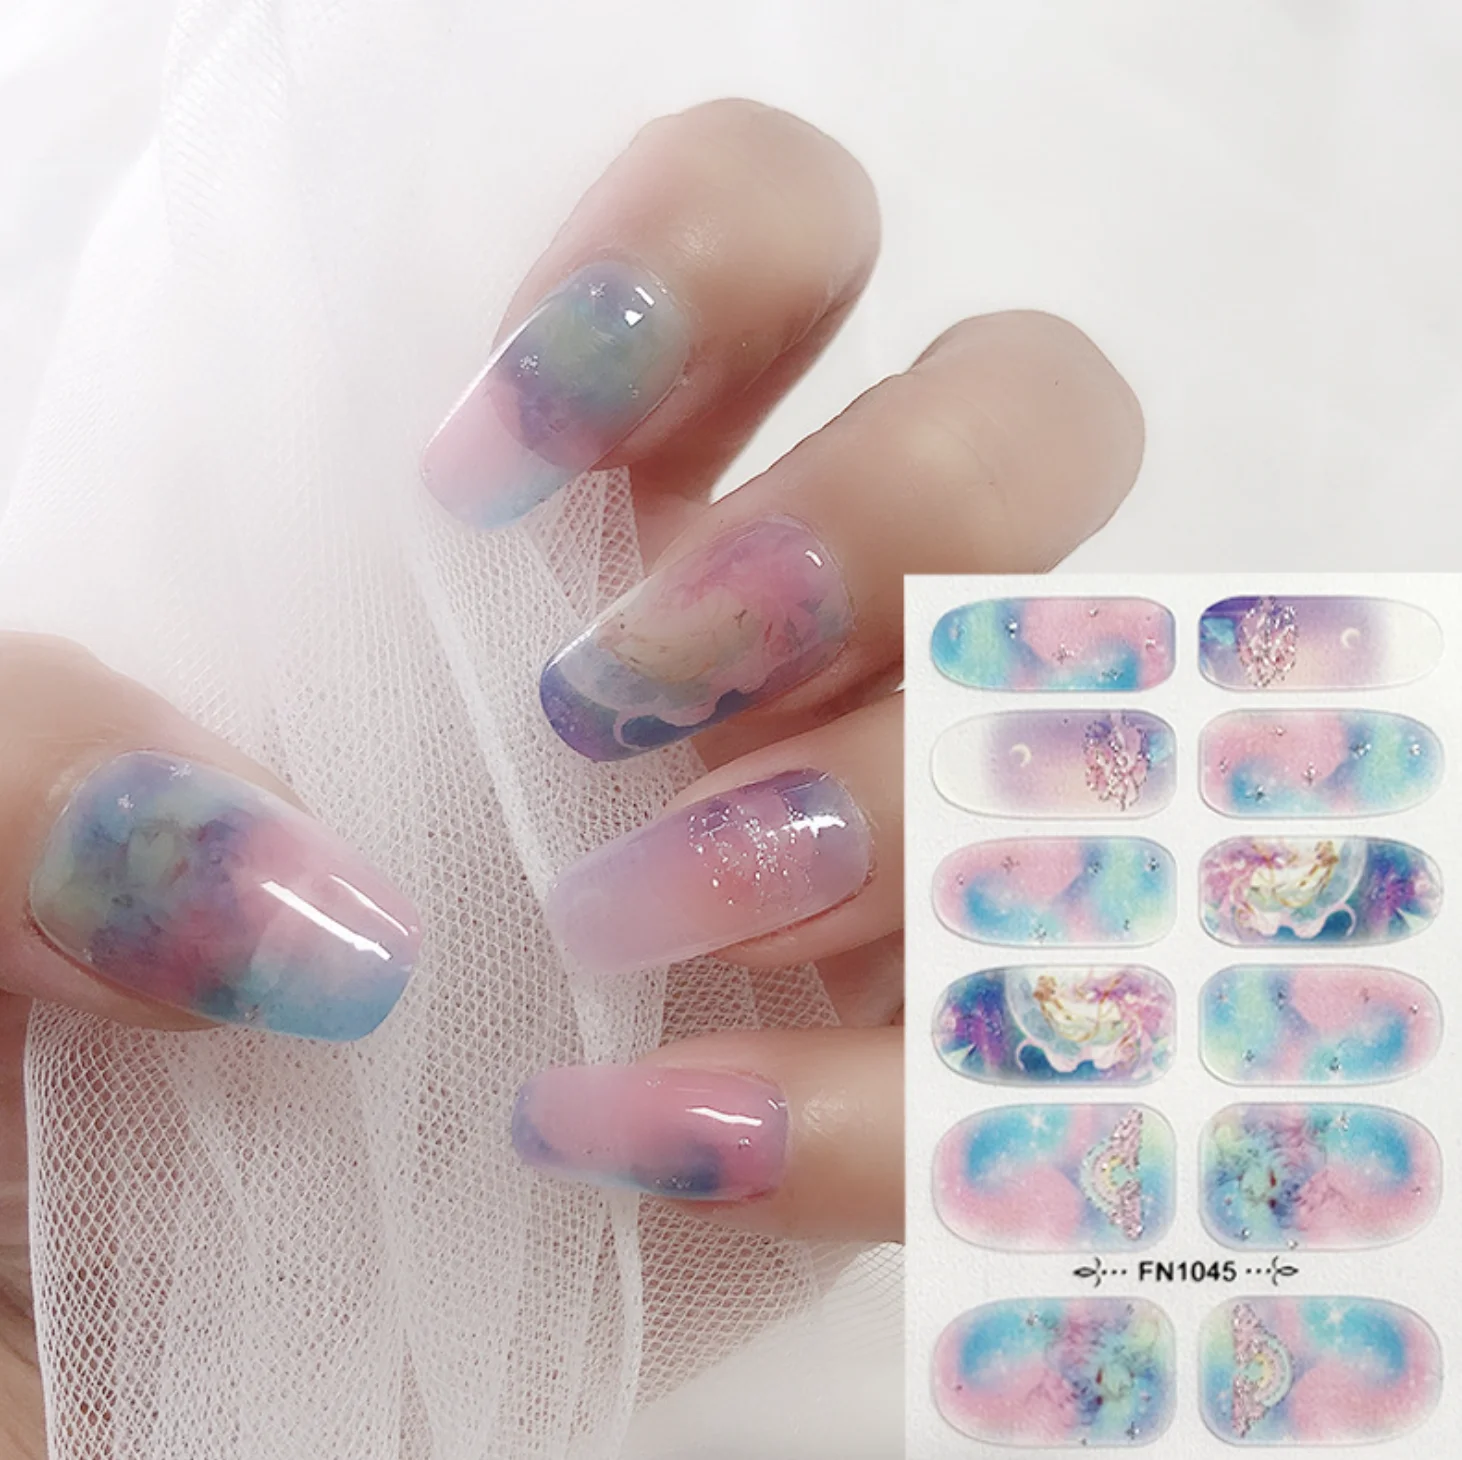 Japanese Anime Nail Polish Equipment Nail Stickers Set Nails Decorations Supplies Full Cover Press On Nails Adhesive Stickers